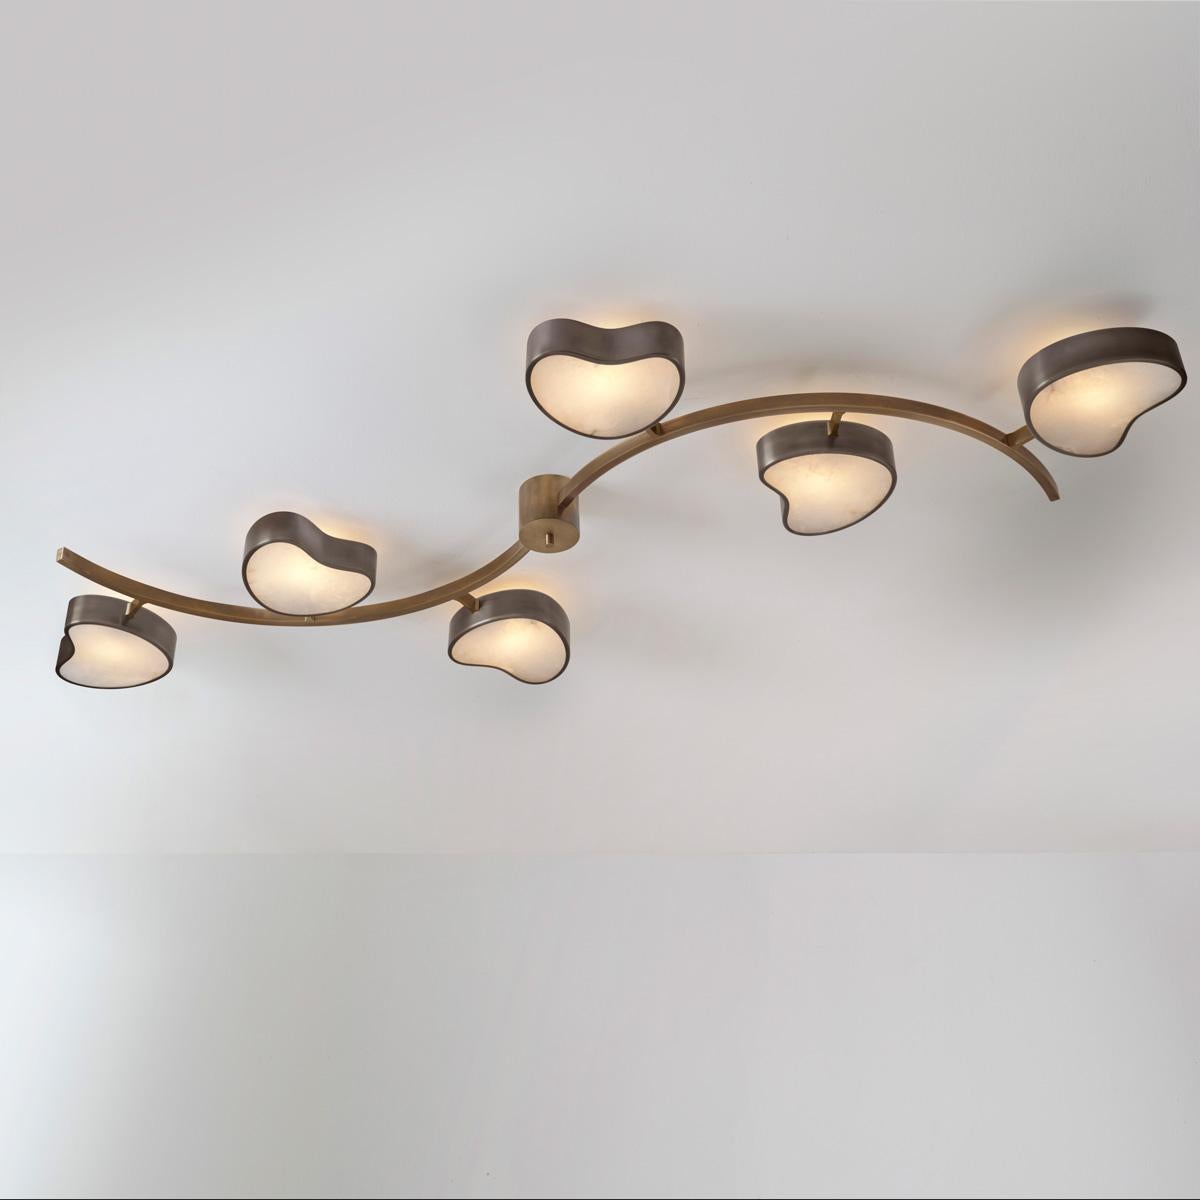 Modern Cuore N.6 Ceiling Light by Gaspare Asaro. Peltro and Bronze Finish For Sale